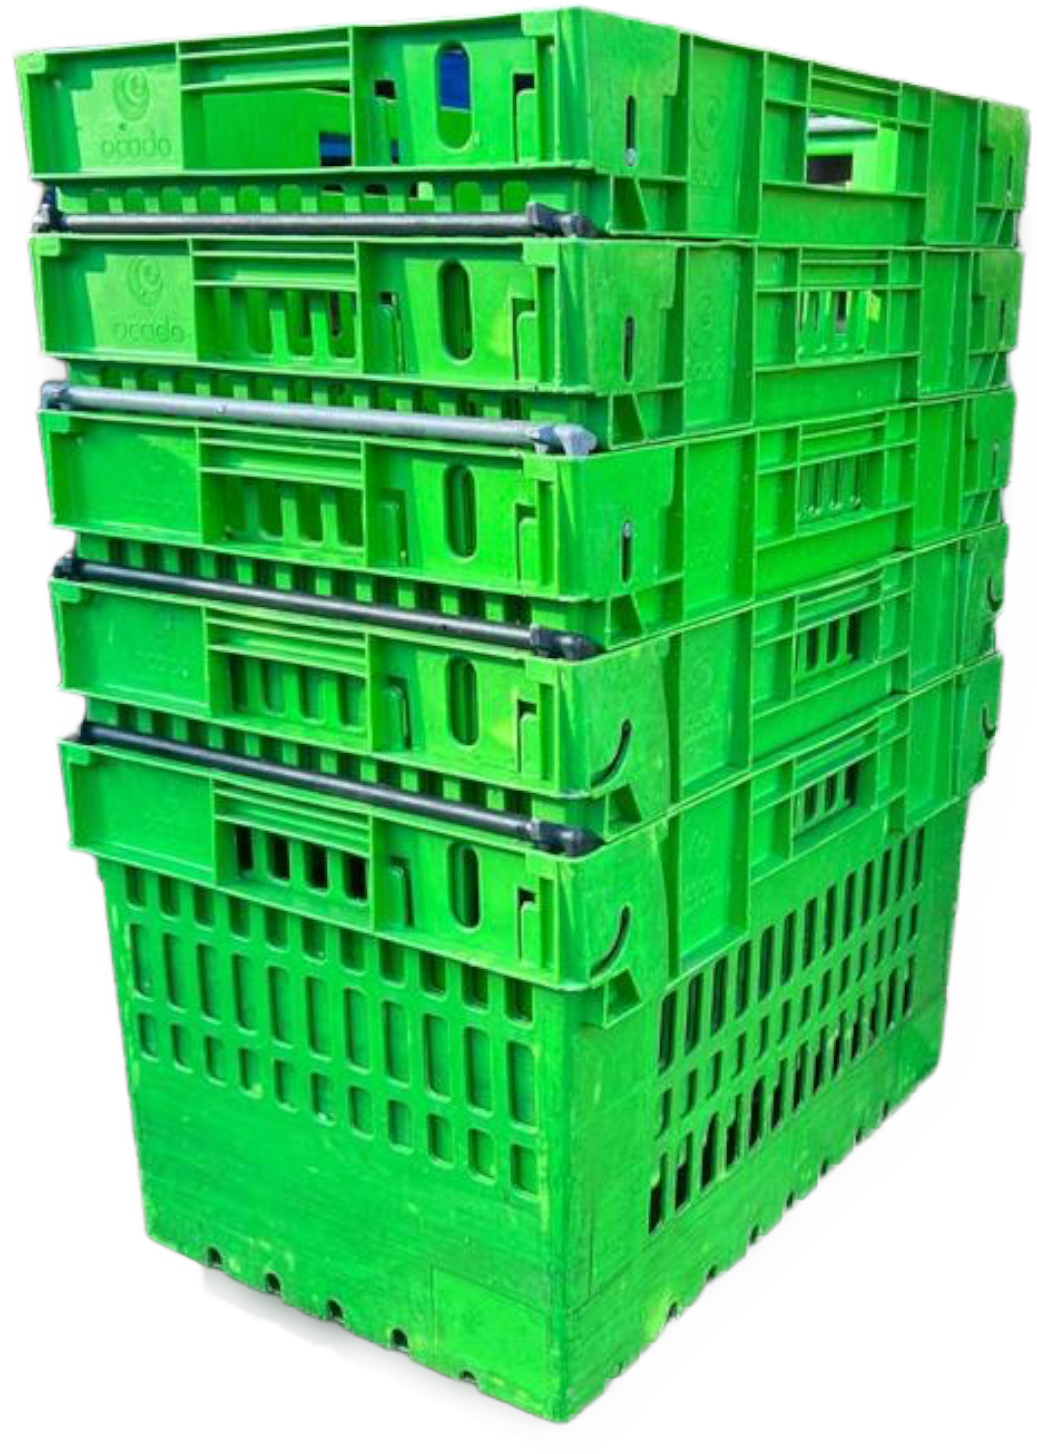 UK Suppliers Of 400x300x300 Black Eco Lidded Container (28 Ltr) For Industrial Industry